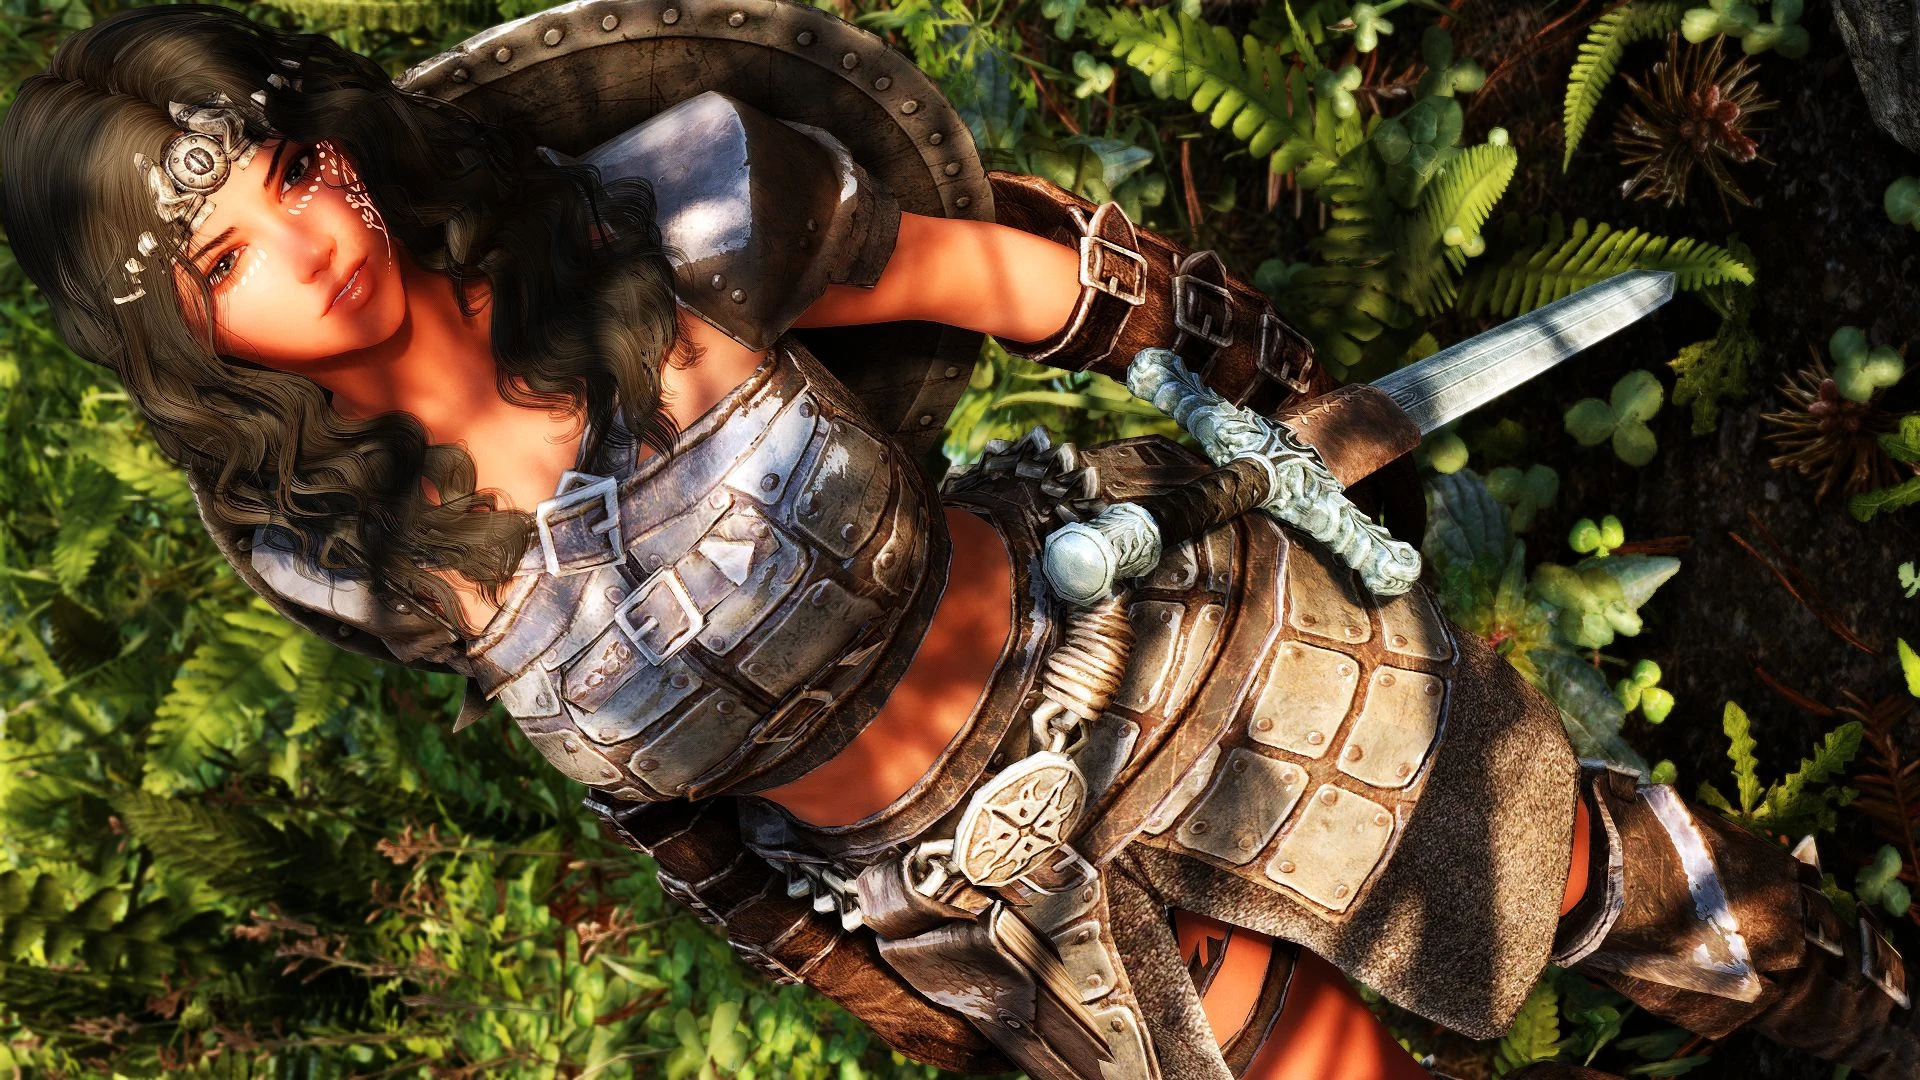 Dawnguard Cute BA A Mashup Dawnguard Armor Replacer Or Standalone For CBBE At Skyrim Special